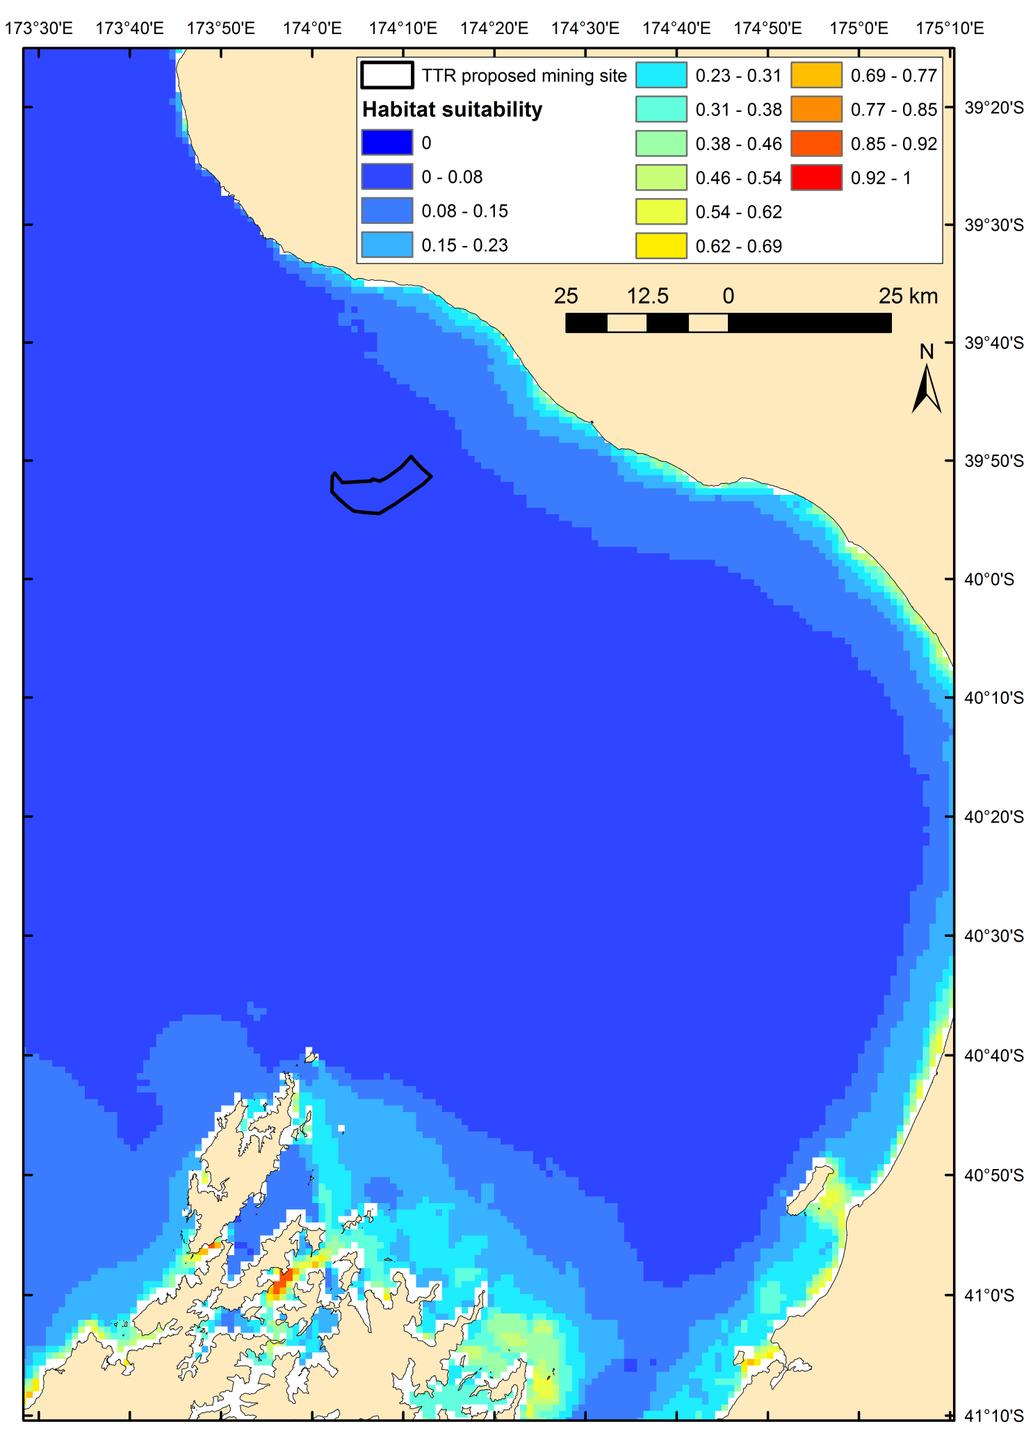 Figure 3-7: Habitat suitability predictions for southern right whales in the South Taranaki Bight derived from the habitat use model. TTR proposed project area outlined in black.